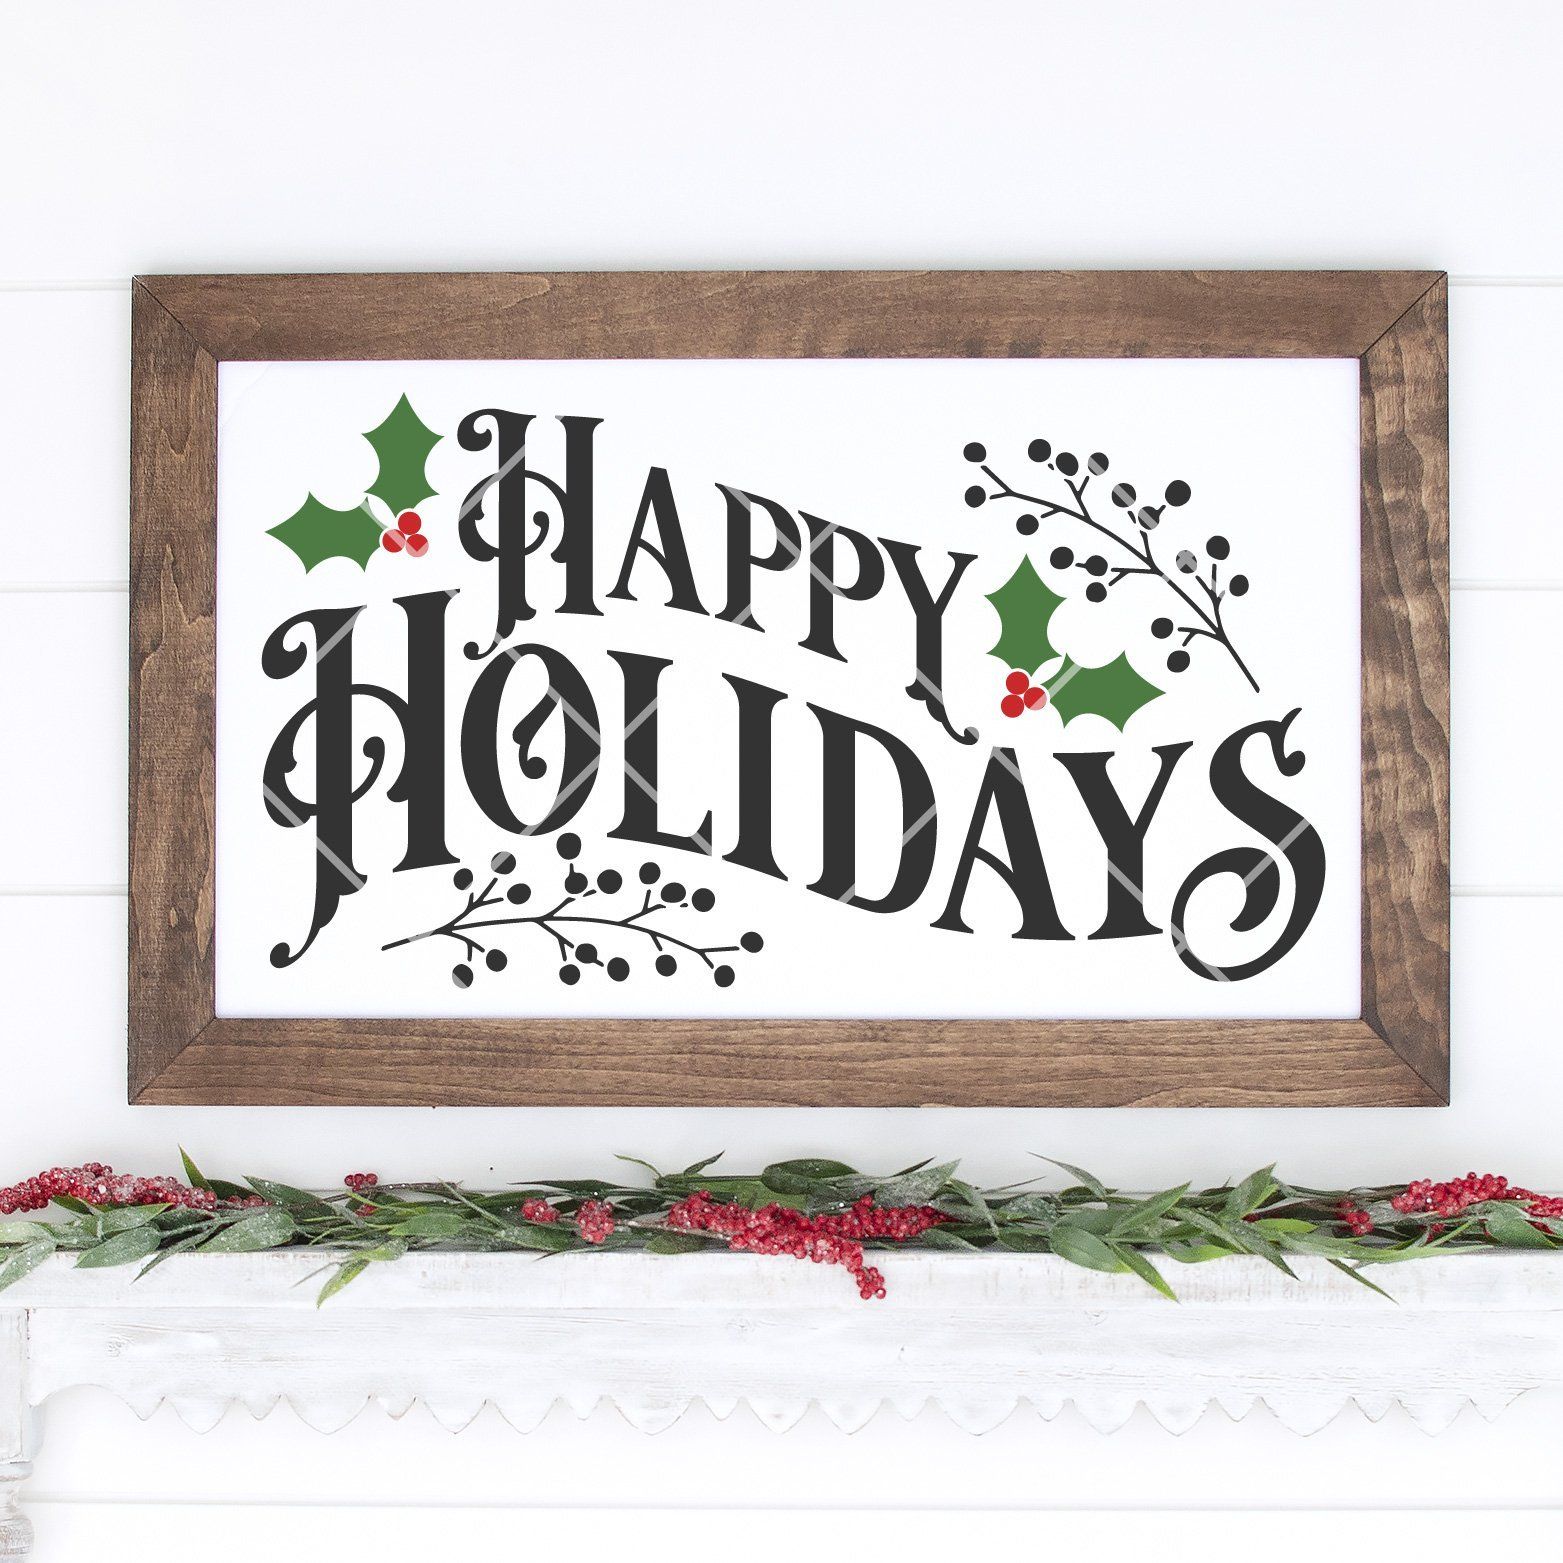 Vintage Happy Holidays with Greenery SVG File - Commercial Use SVG Files for Cricut & Silhouette